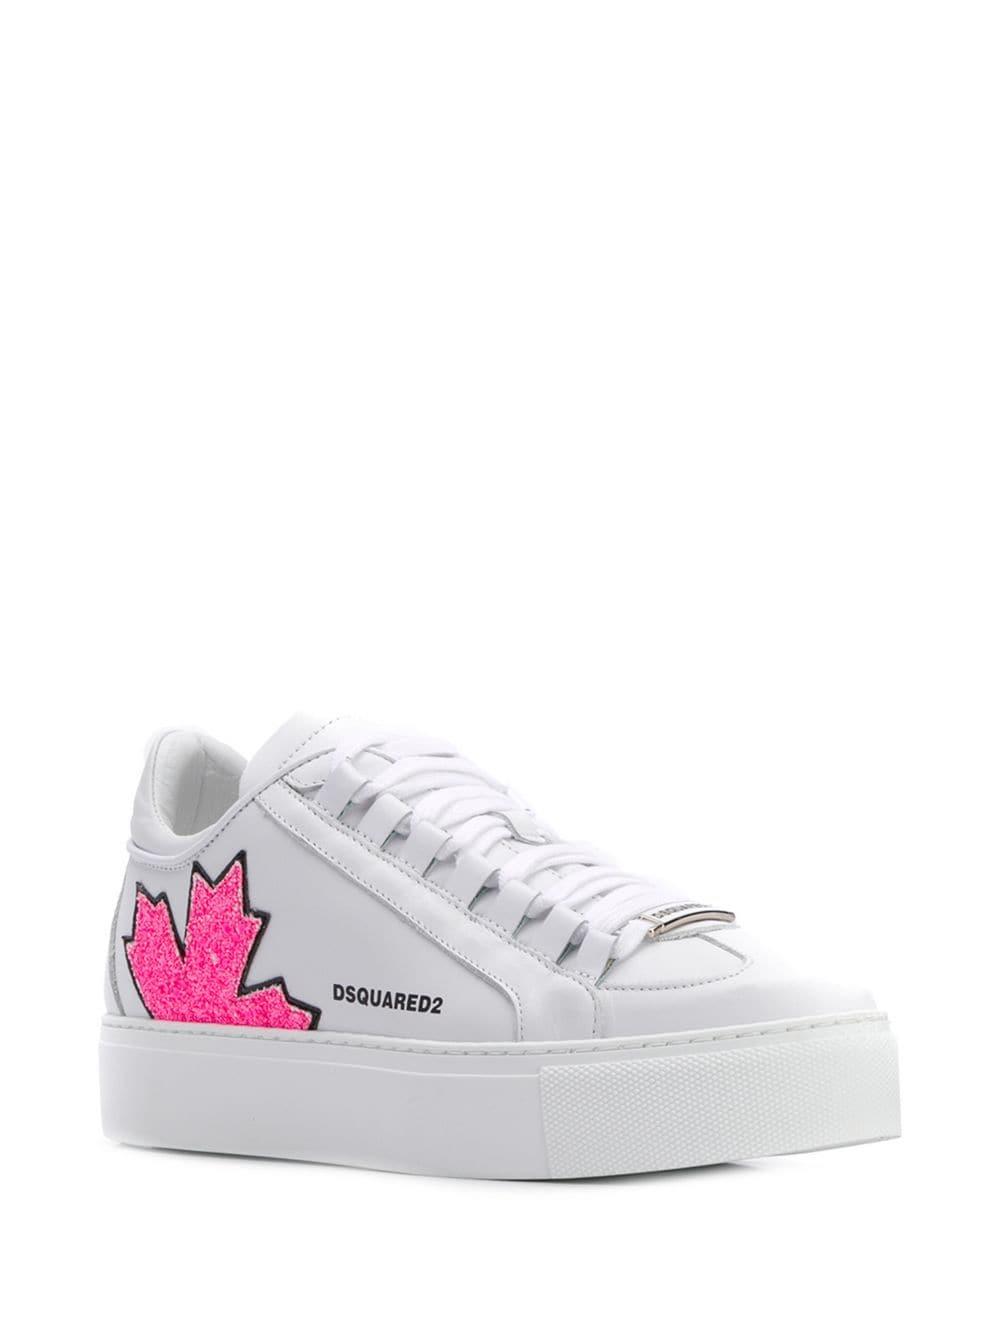 dsquared2 maple leaf sneakers